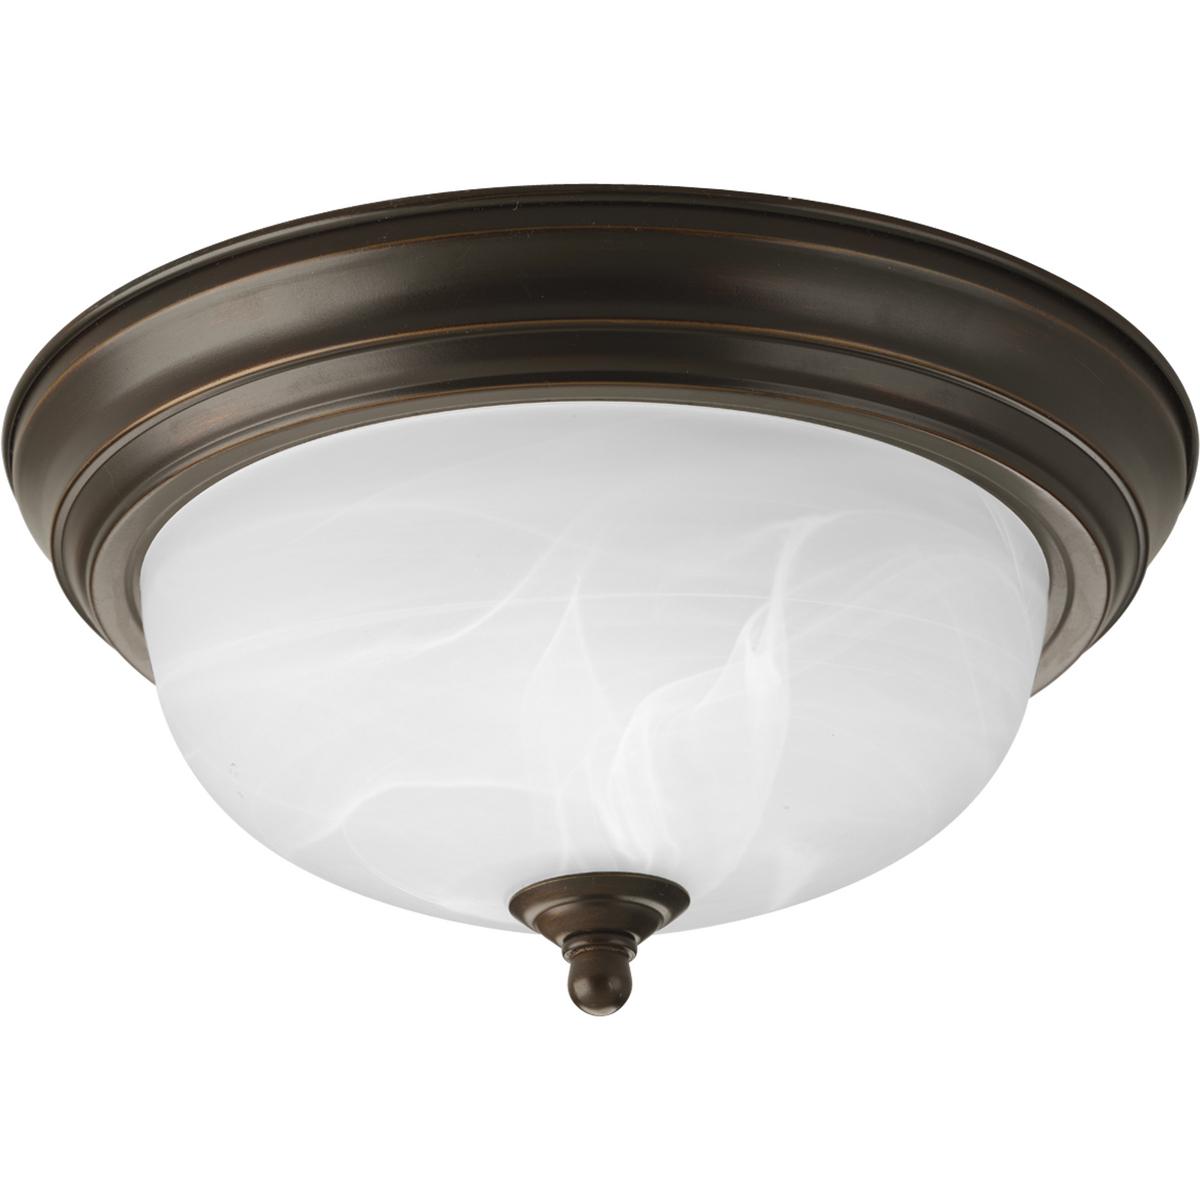 Hubbell P3924-20 One-light 11" flush mount with dome shaped alabaster glass, solid trim and decorative knobs. Center lock-up with matching finial. Antique Bronze finish.  ; Antique Bronze finish. ; Alabaster Glass. ; Decorative details. ; Requires one (1) 60-watt bulbs (n